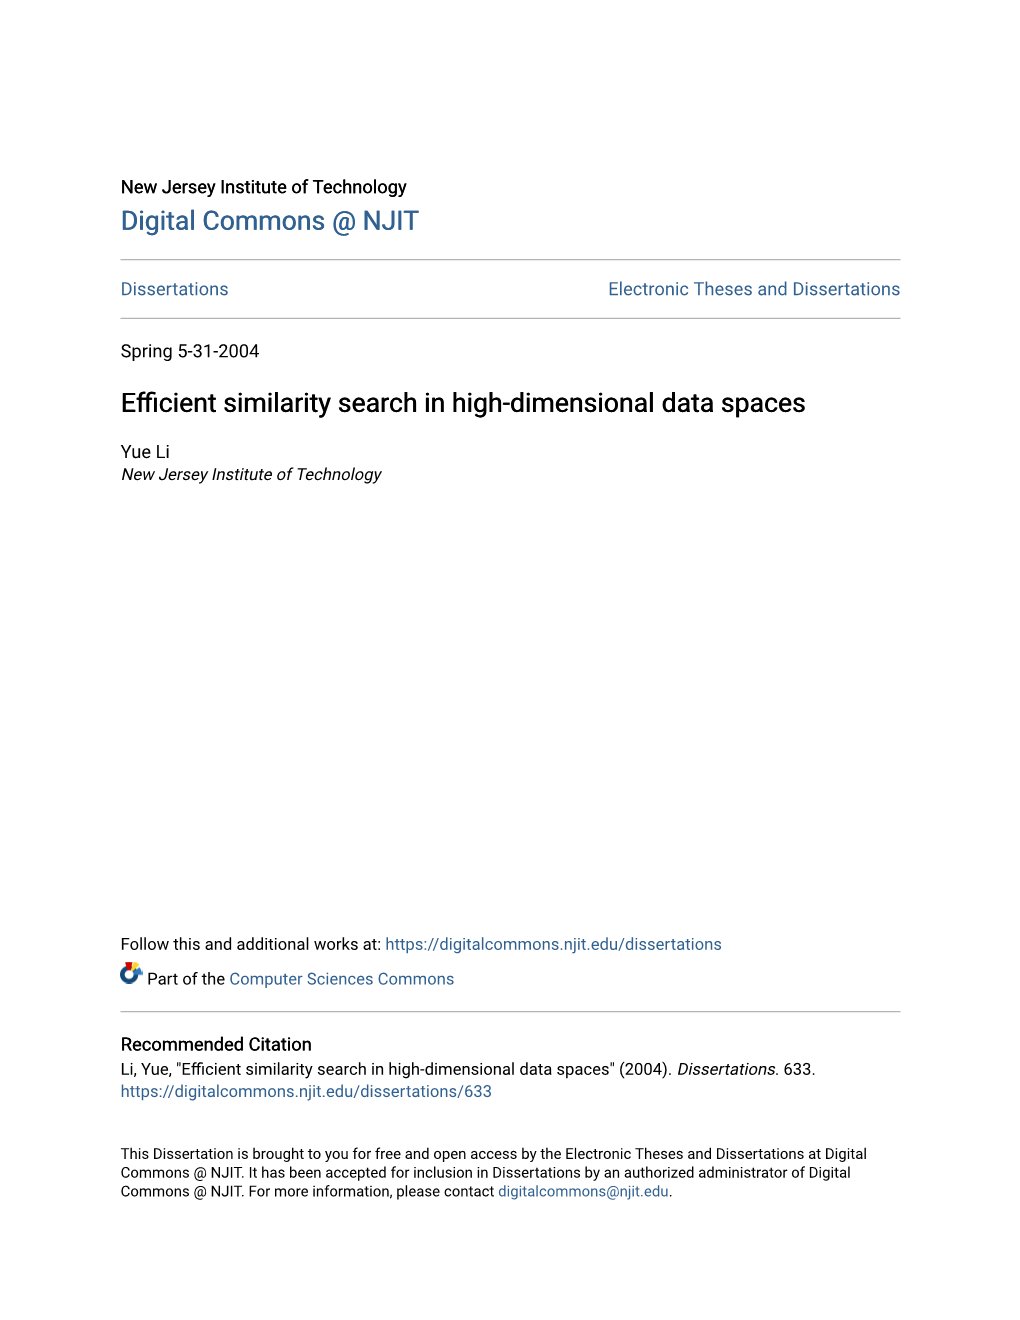 Efficient Similarity Search in High-Dimensional Data Spaces